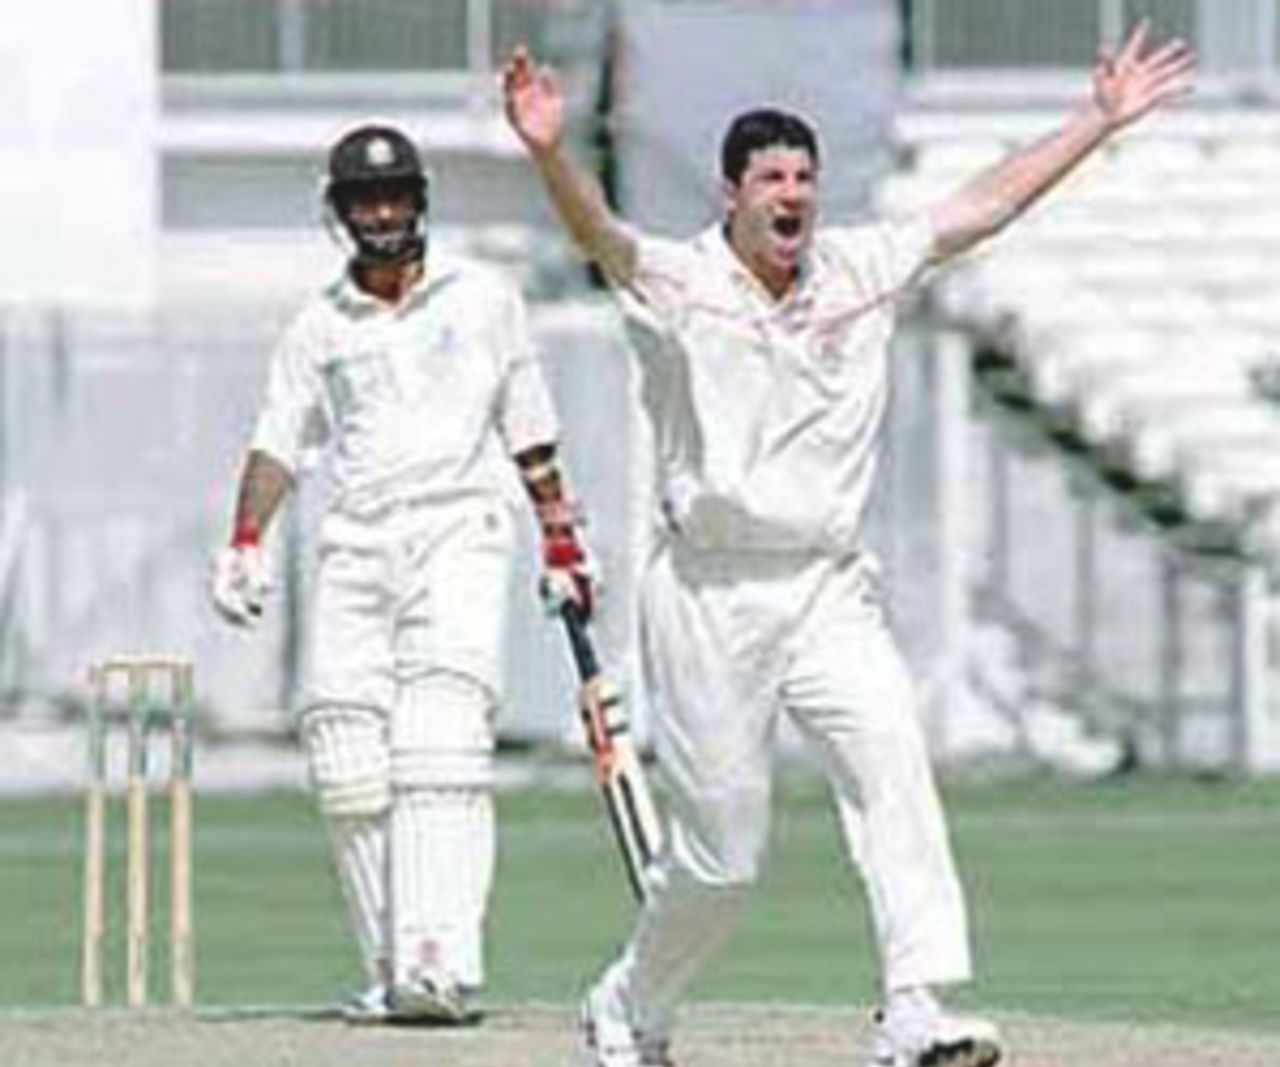 Smethurst makes a successful appeal for a leg before against Nadeem Shahid, PPP healthcare County Championship Division One, 2000, Surrey v Lancashire, Kennington Oval, London, 02-05 August 2000(Day 1).